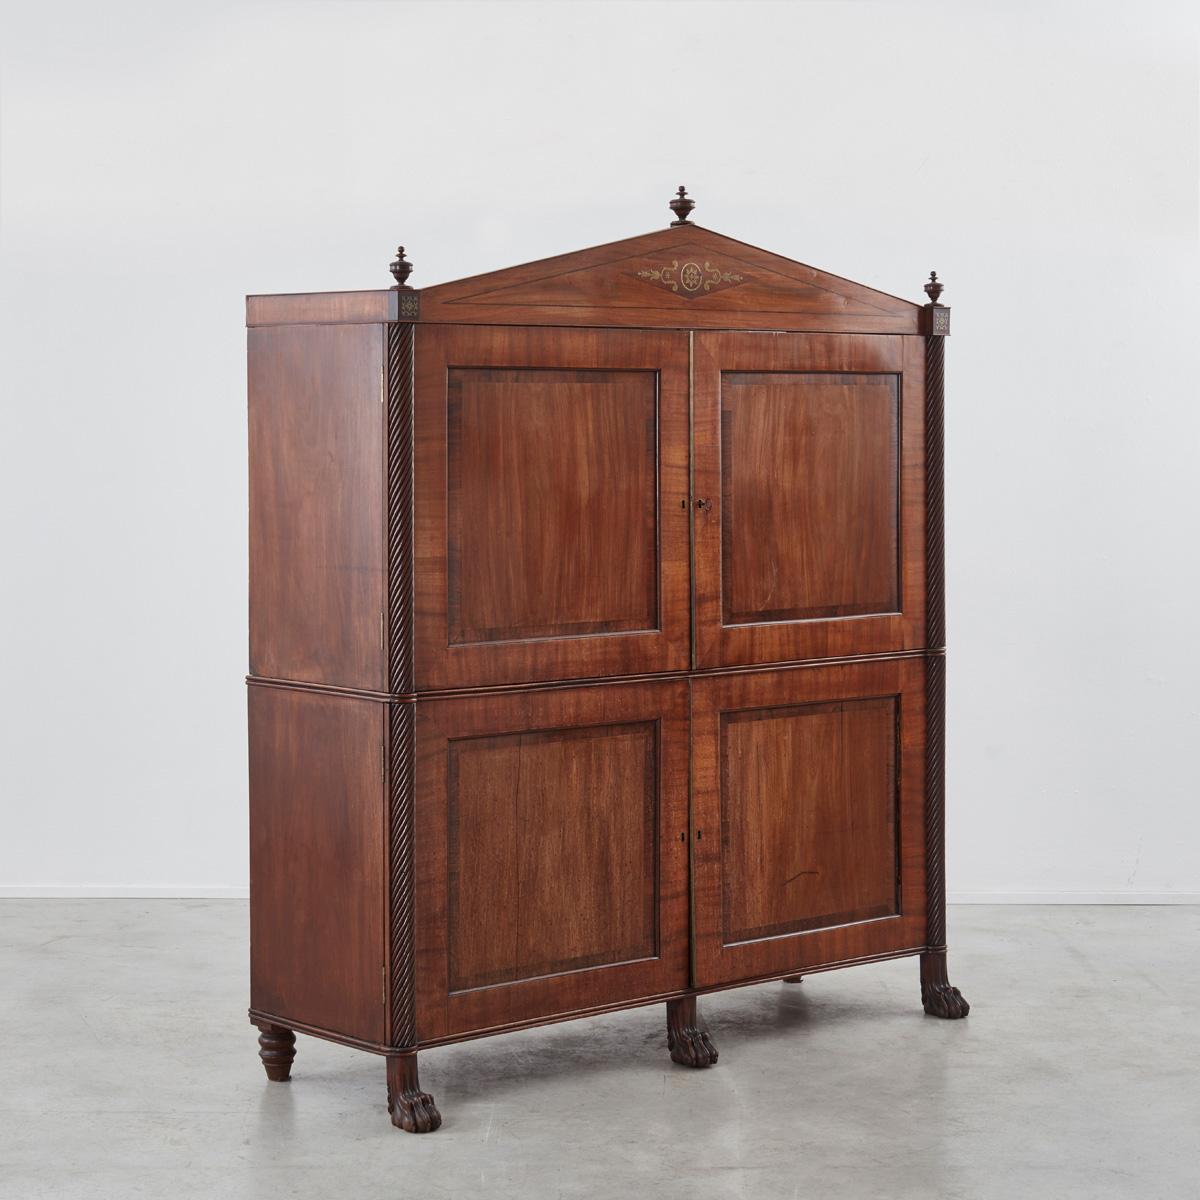 Neoclassical 1820s German Mahogany Wardrobe with Classical Motifs For Sale